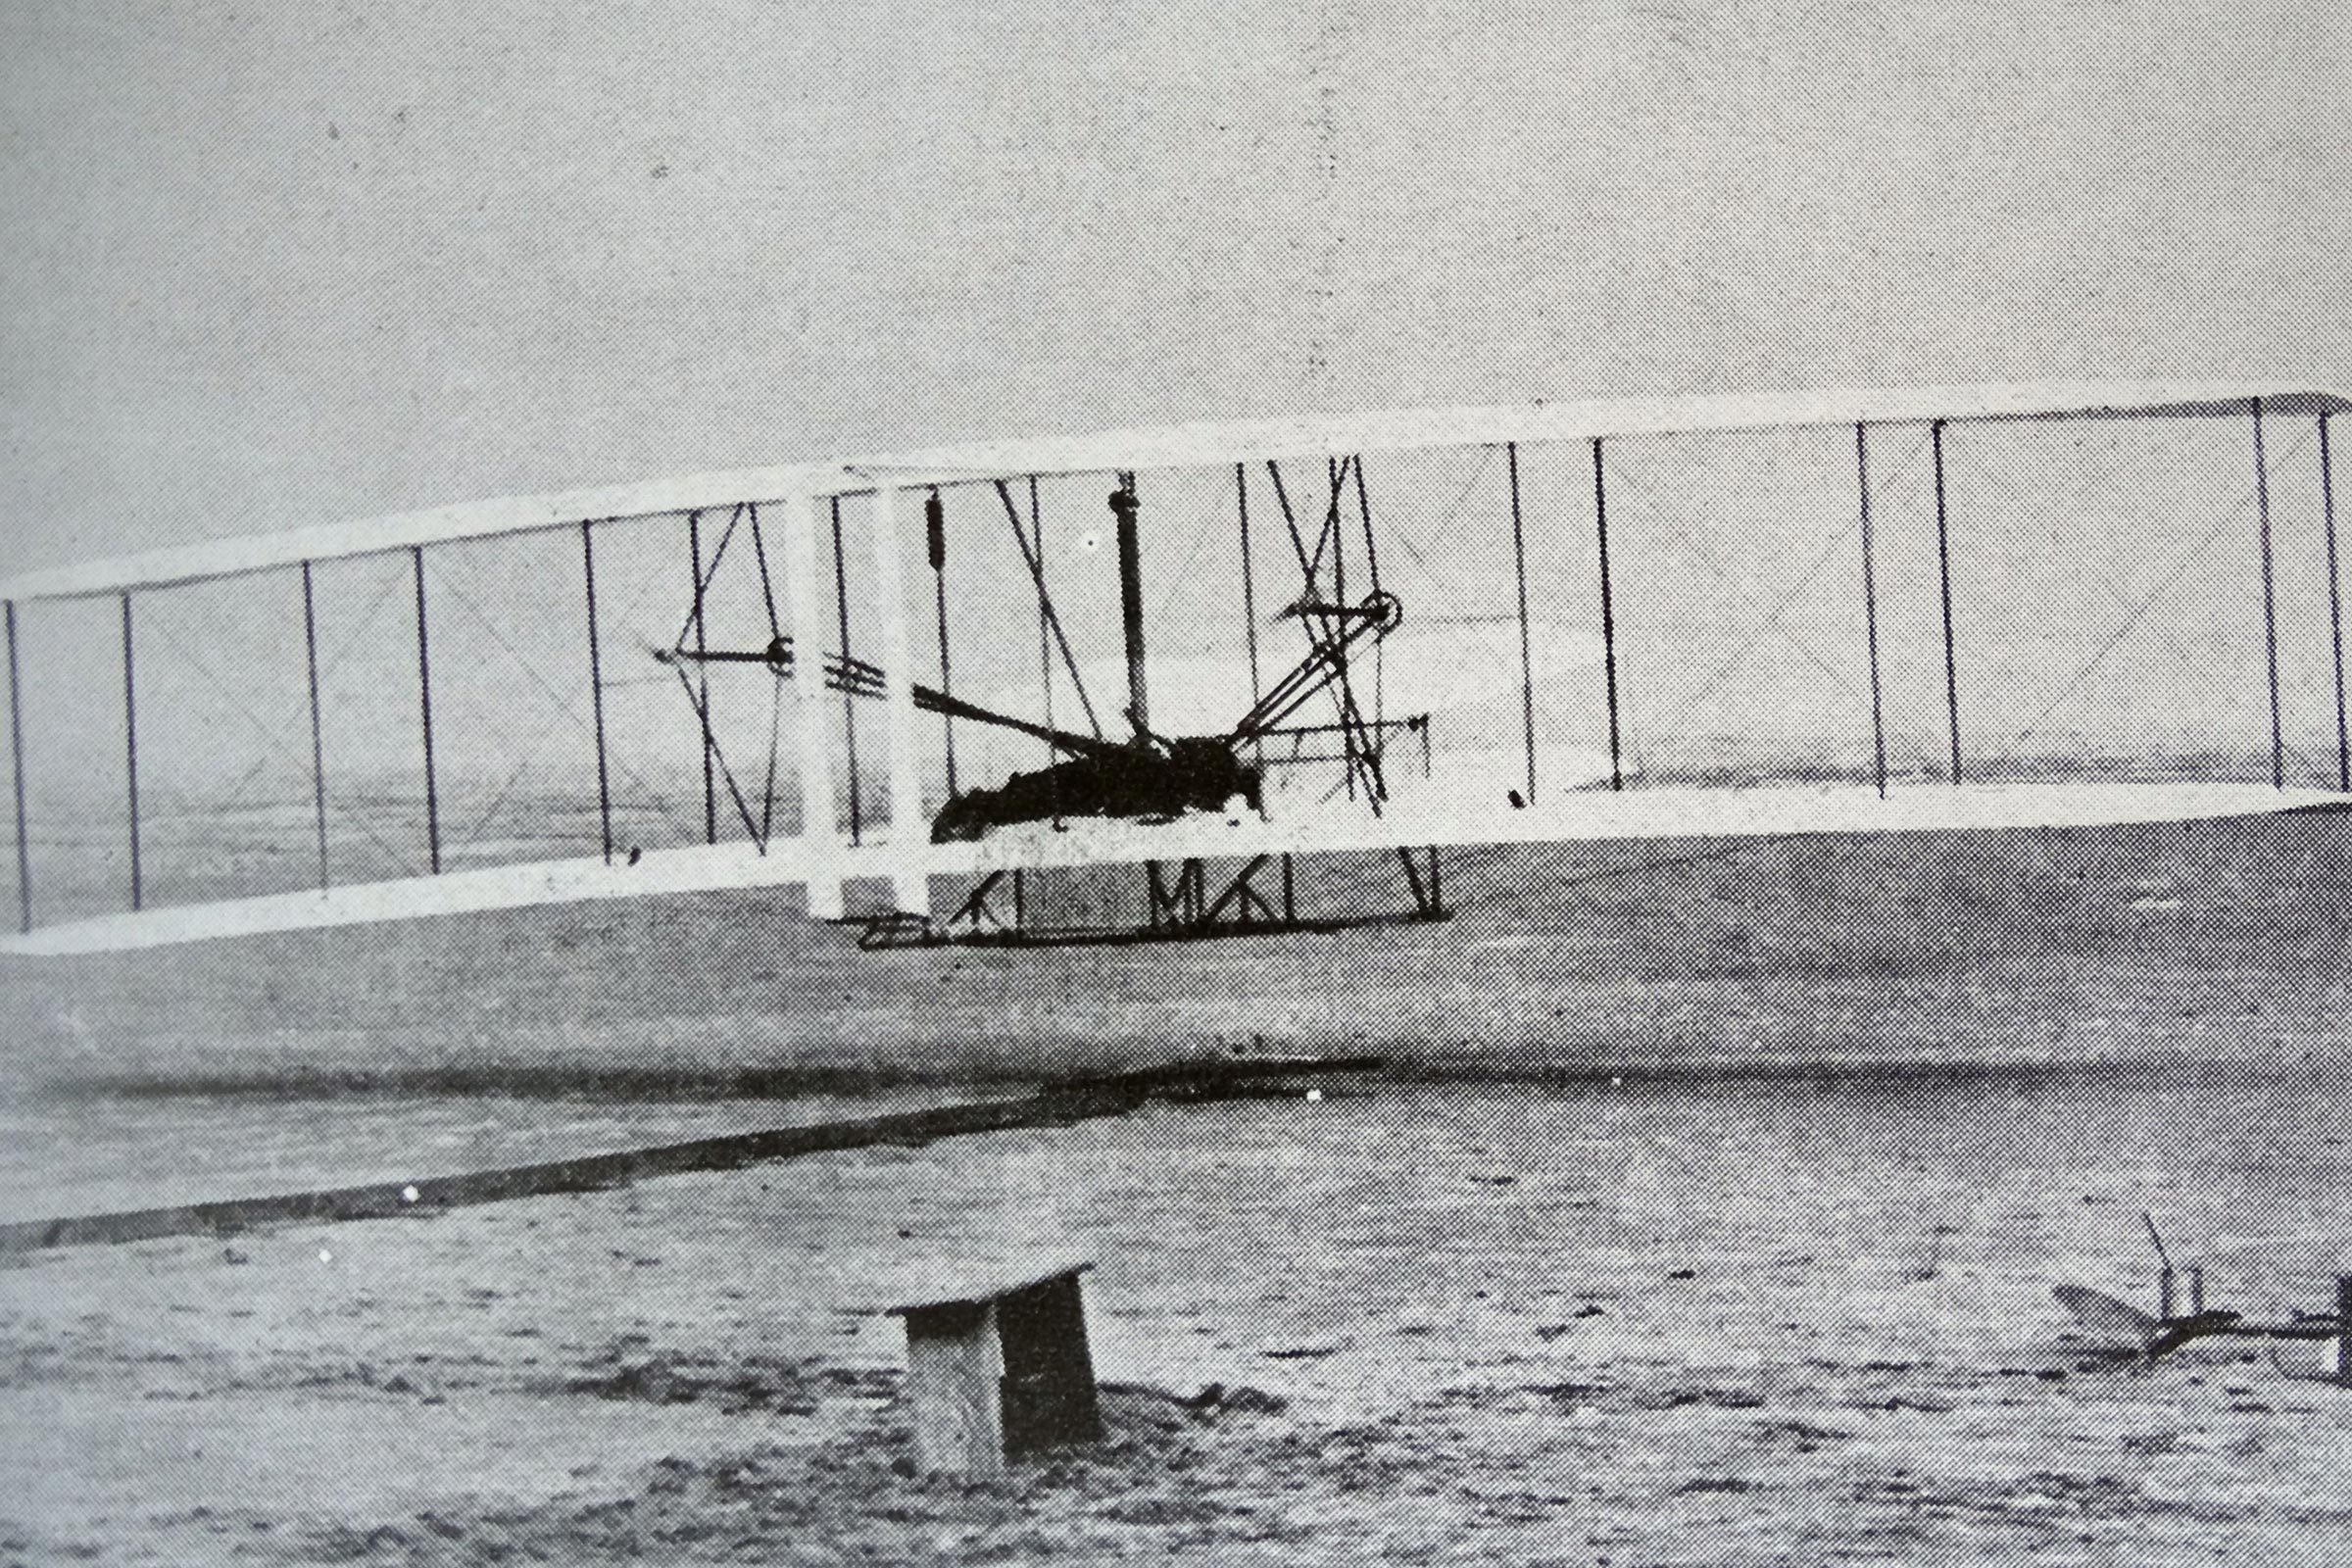 The 'Flyer' makes a perfect take-off. Orville Wright, arranged that this photograph would be taken of the first controlled, sustained and powered heavier-than-air flight. 17th December, 1903.